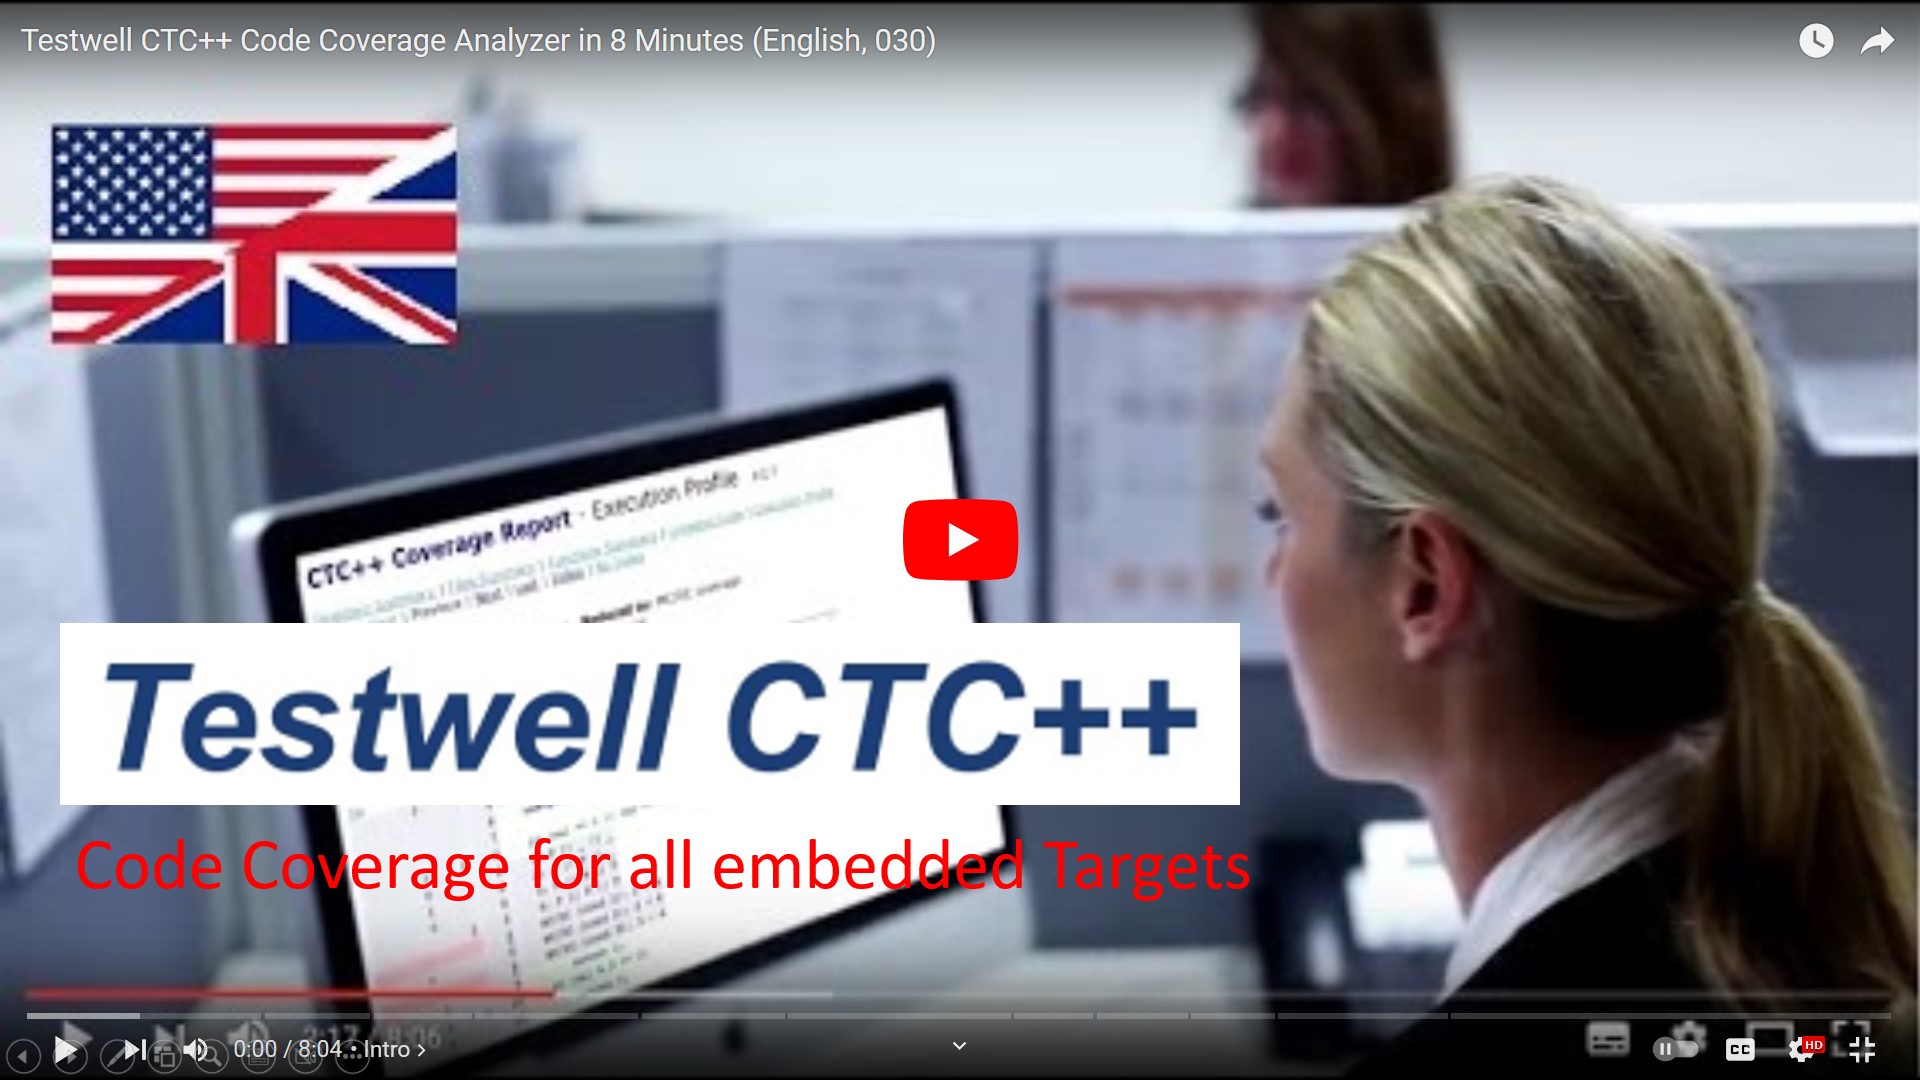 Code Coverage Analyser Testwell CTC++: Produktvideo